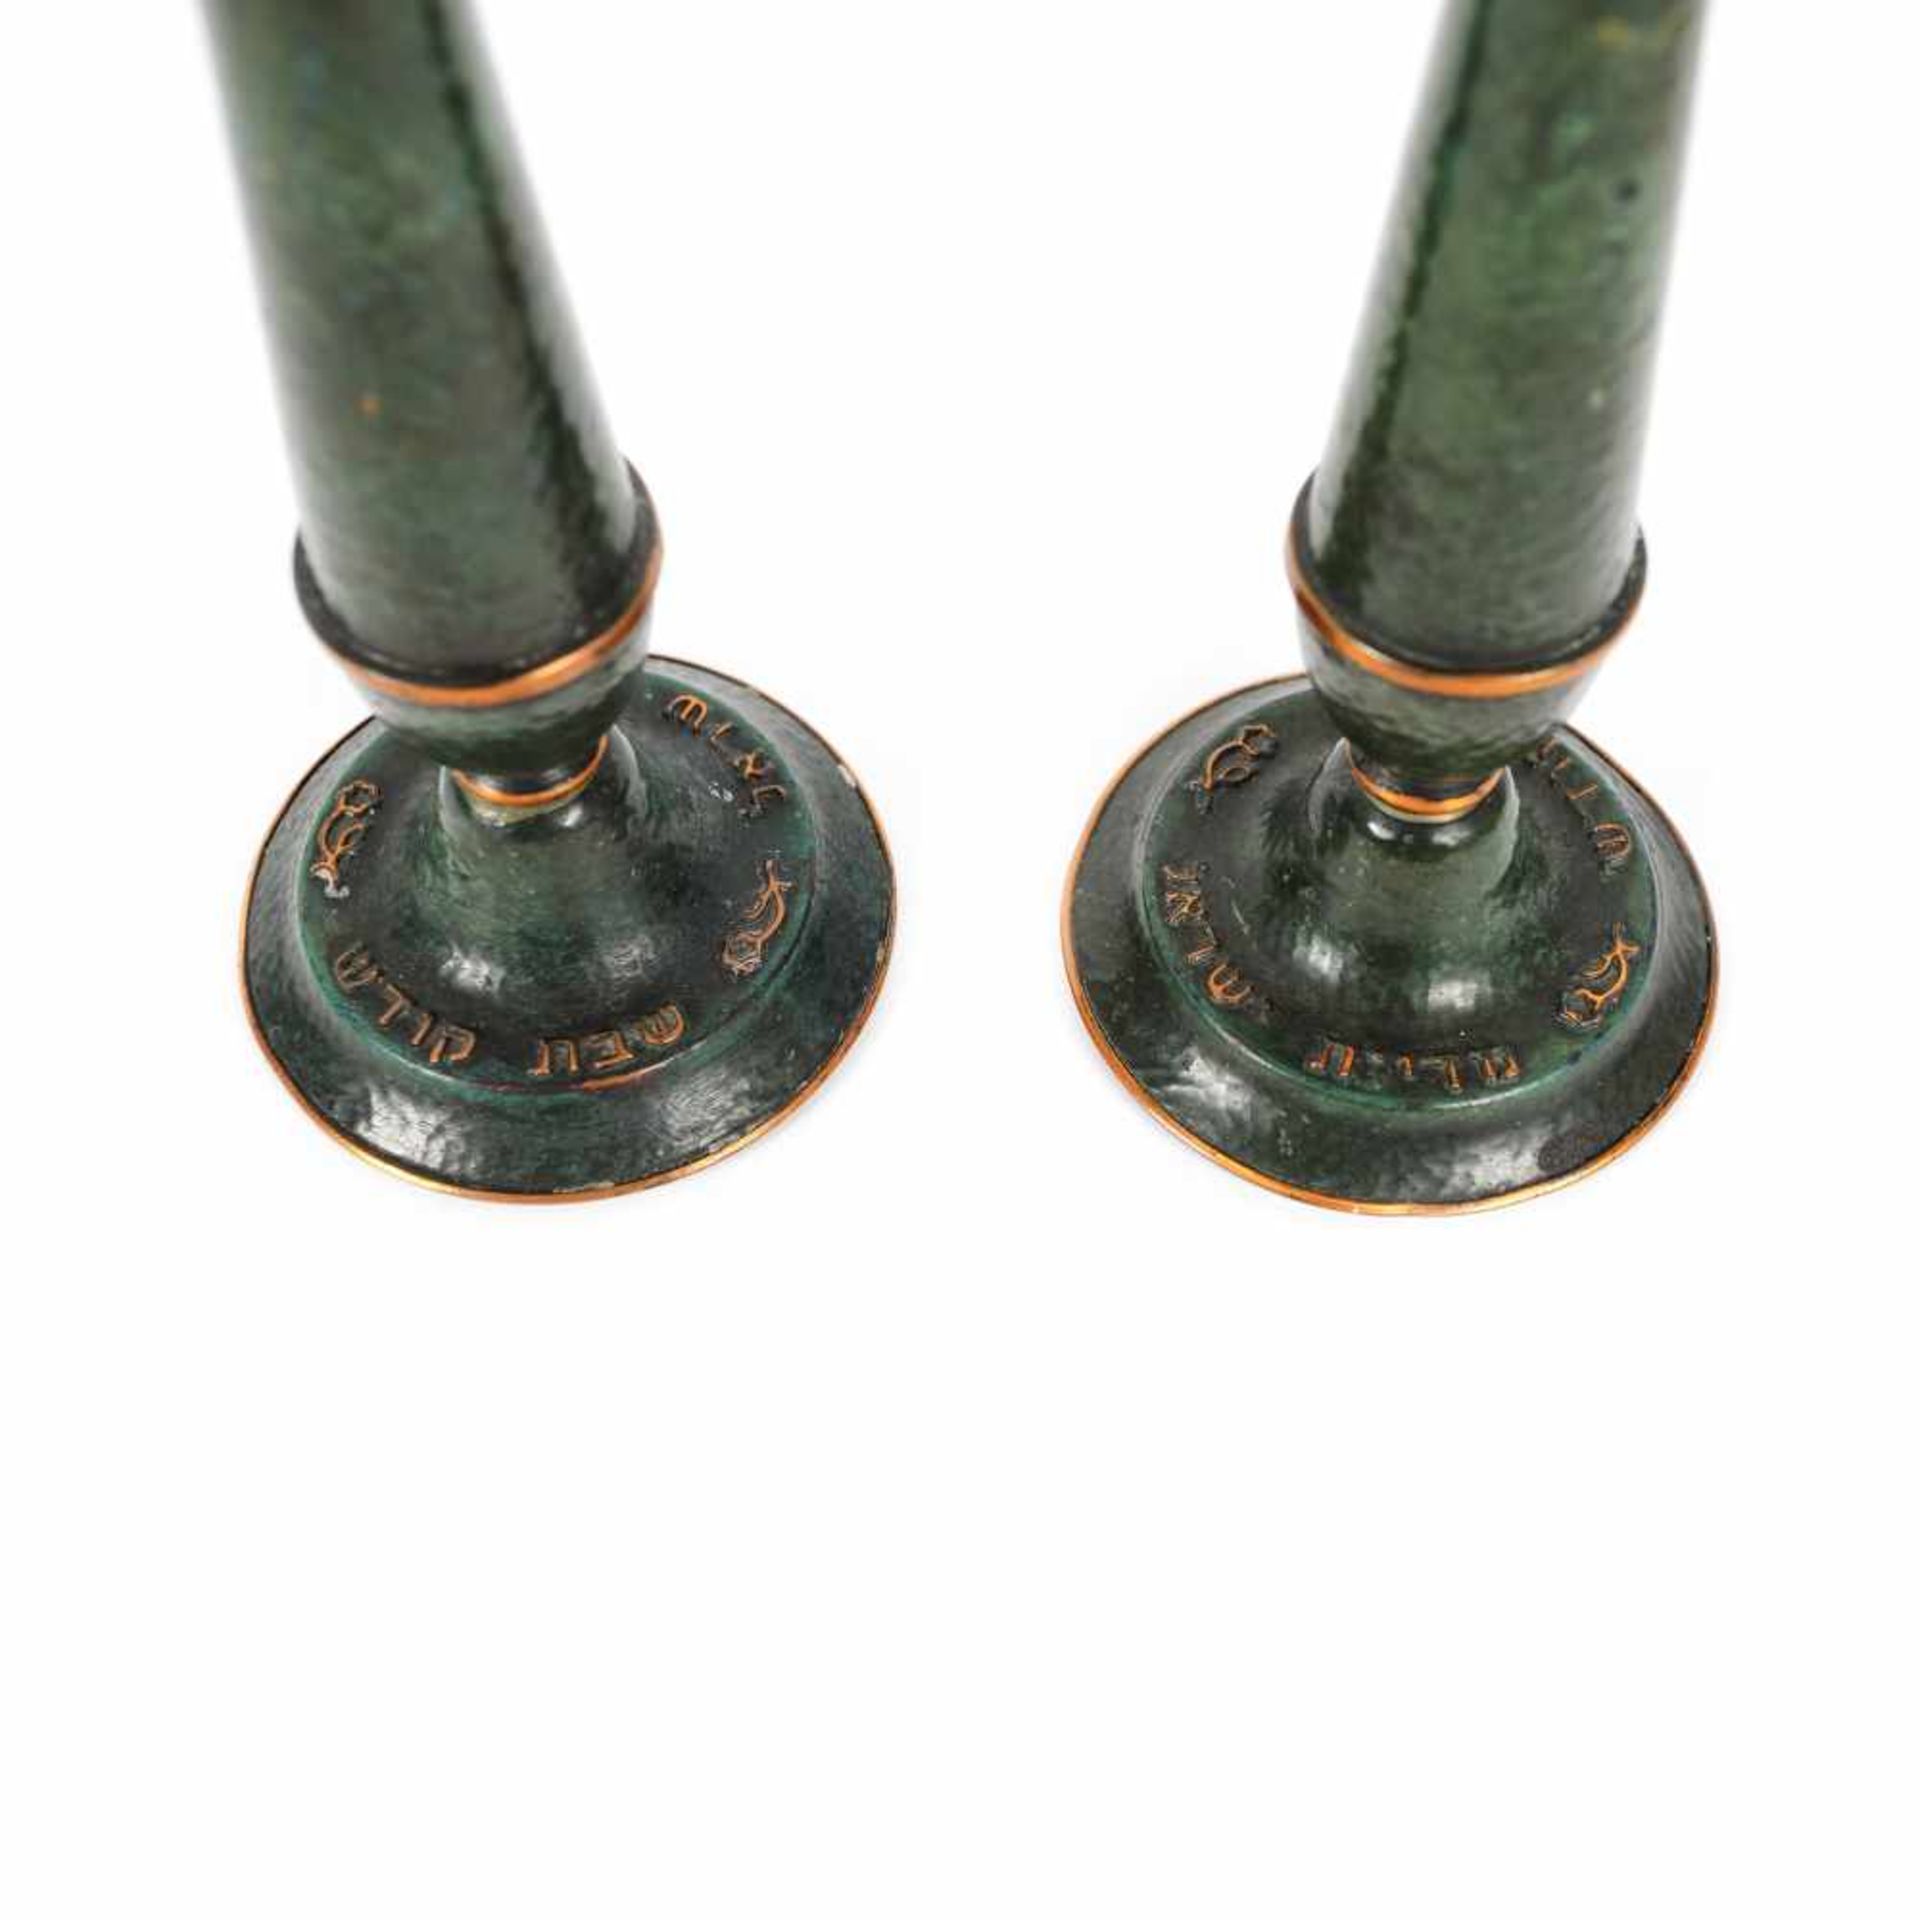 Pair of enamelled brass candlesticks for Shabbat with Hebrew inscriptions - Image 2 of 2